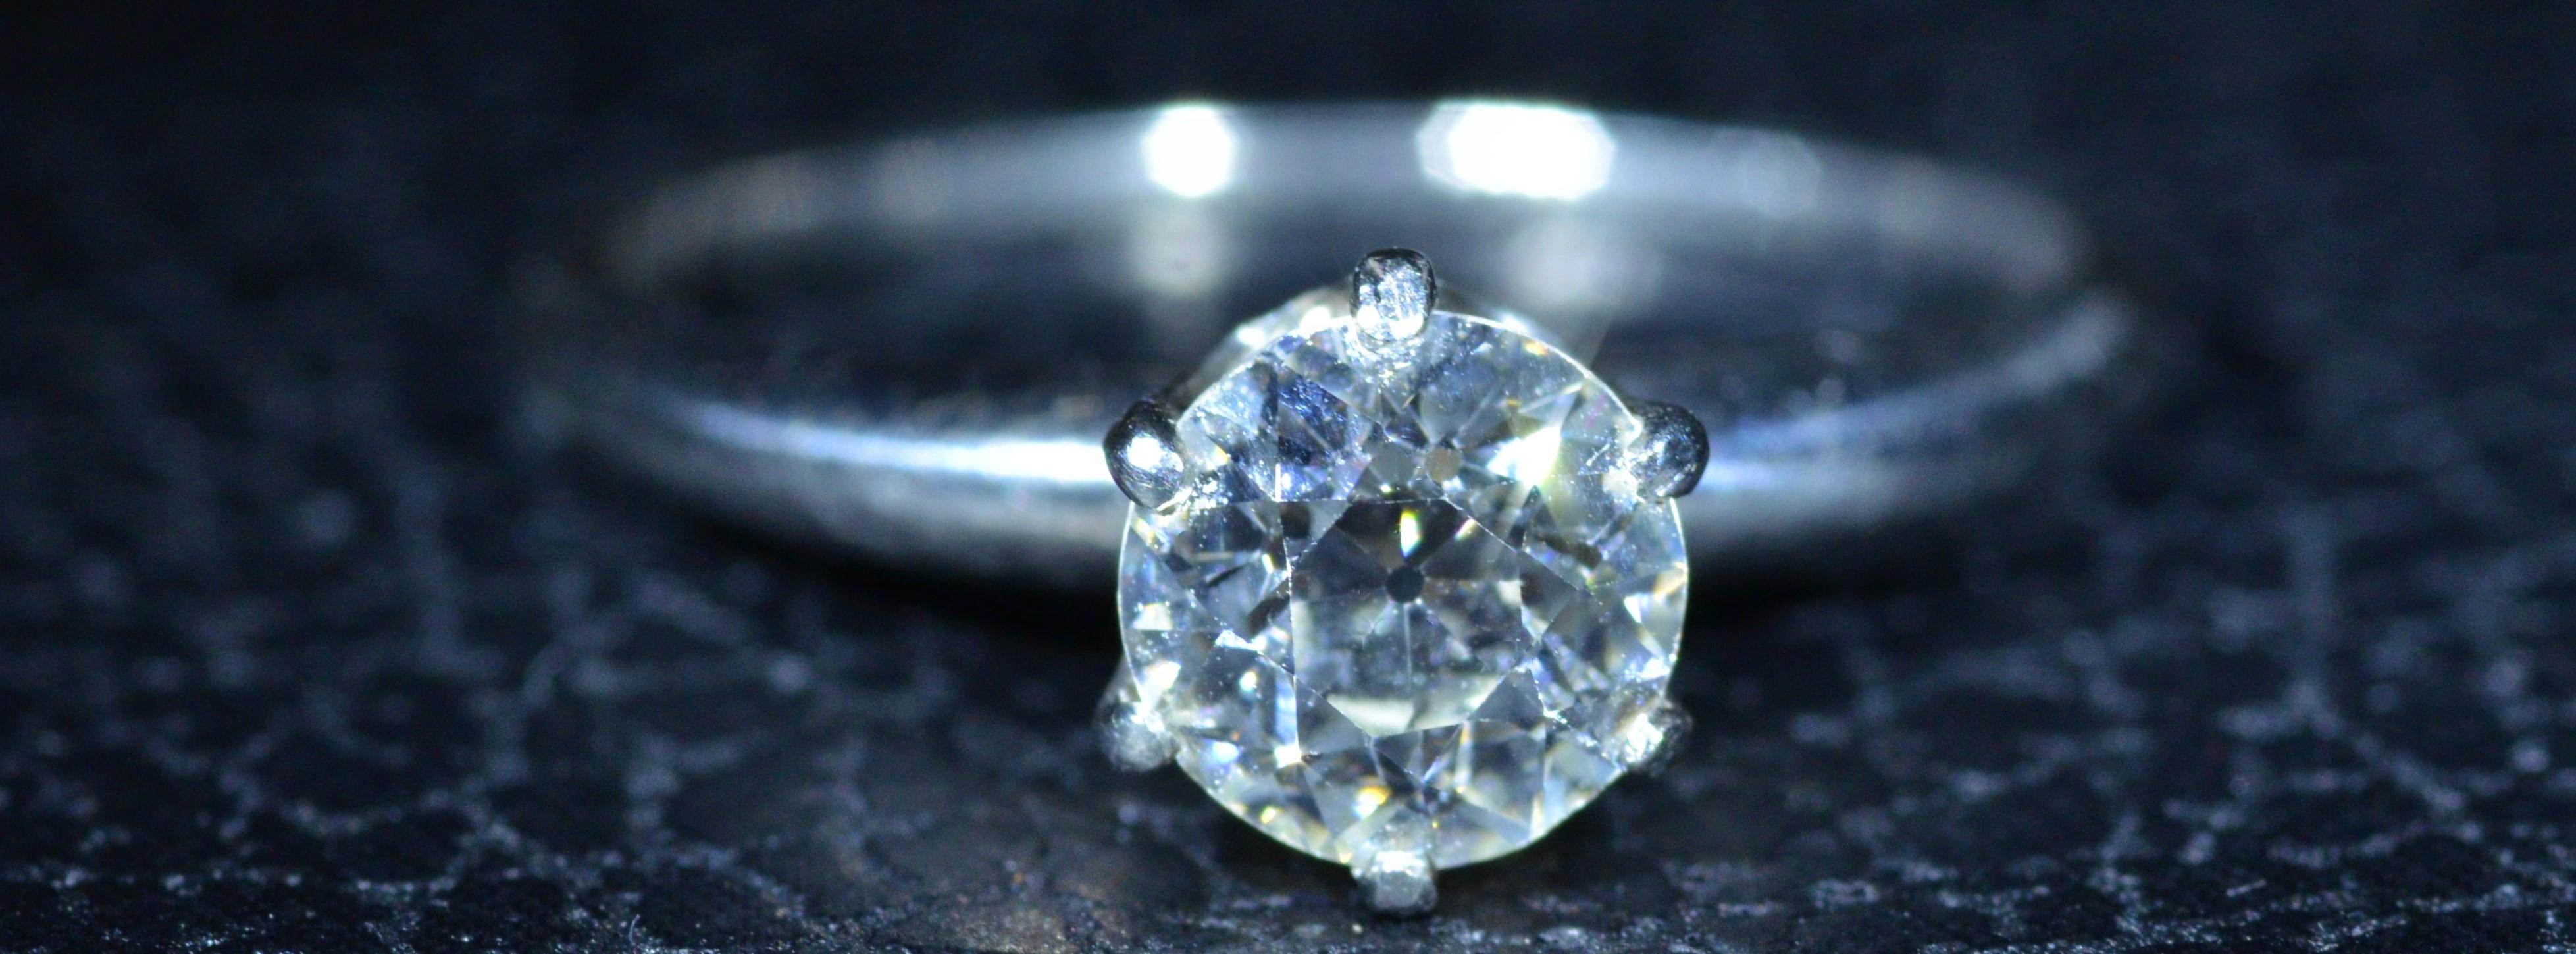 Old European Cut Antique Tiffany & Co. Solitaire Engagement Ring with 0.85 Carat Diamond For Sale